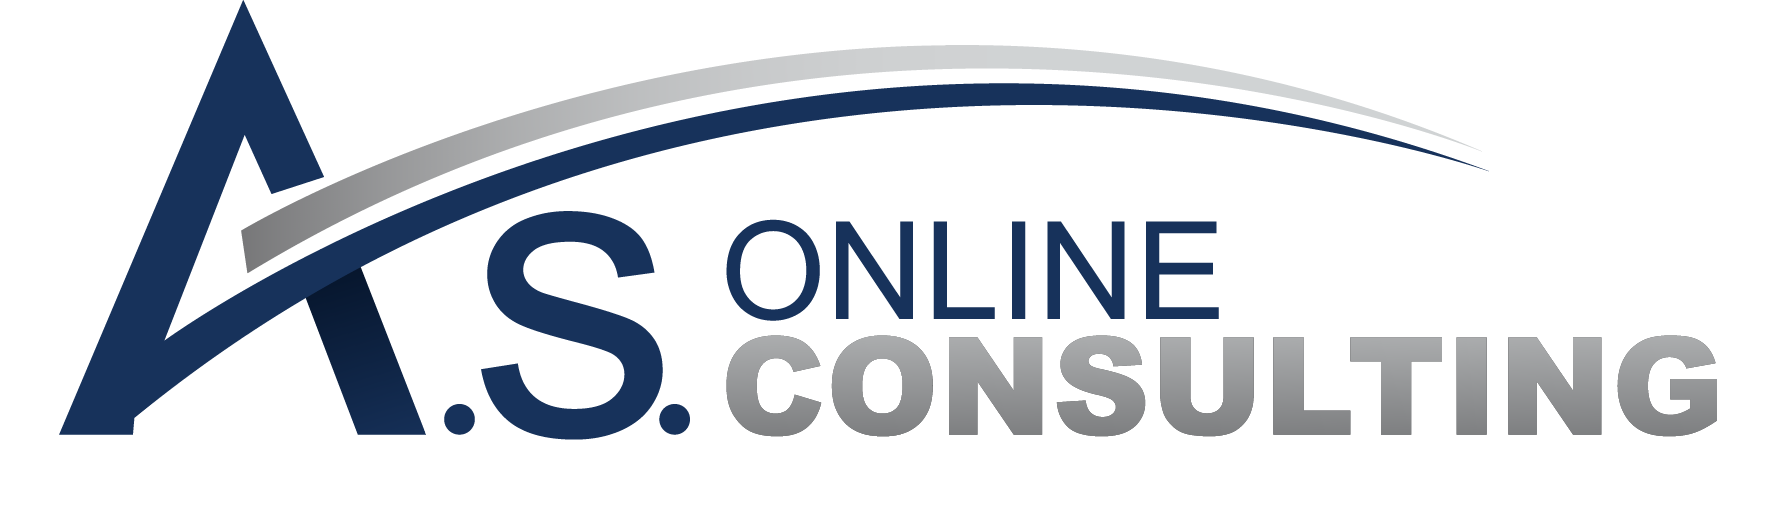 AS ONLINE CONSULTING INC.